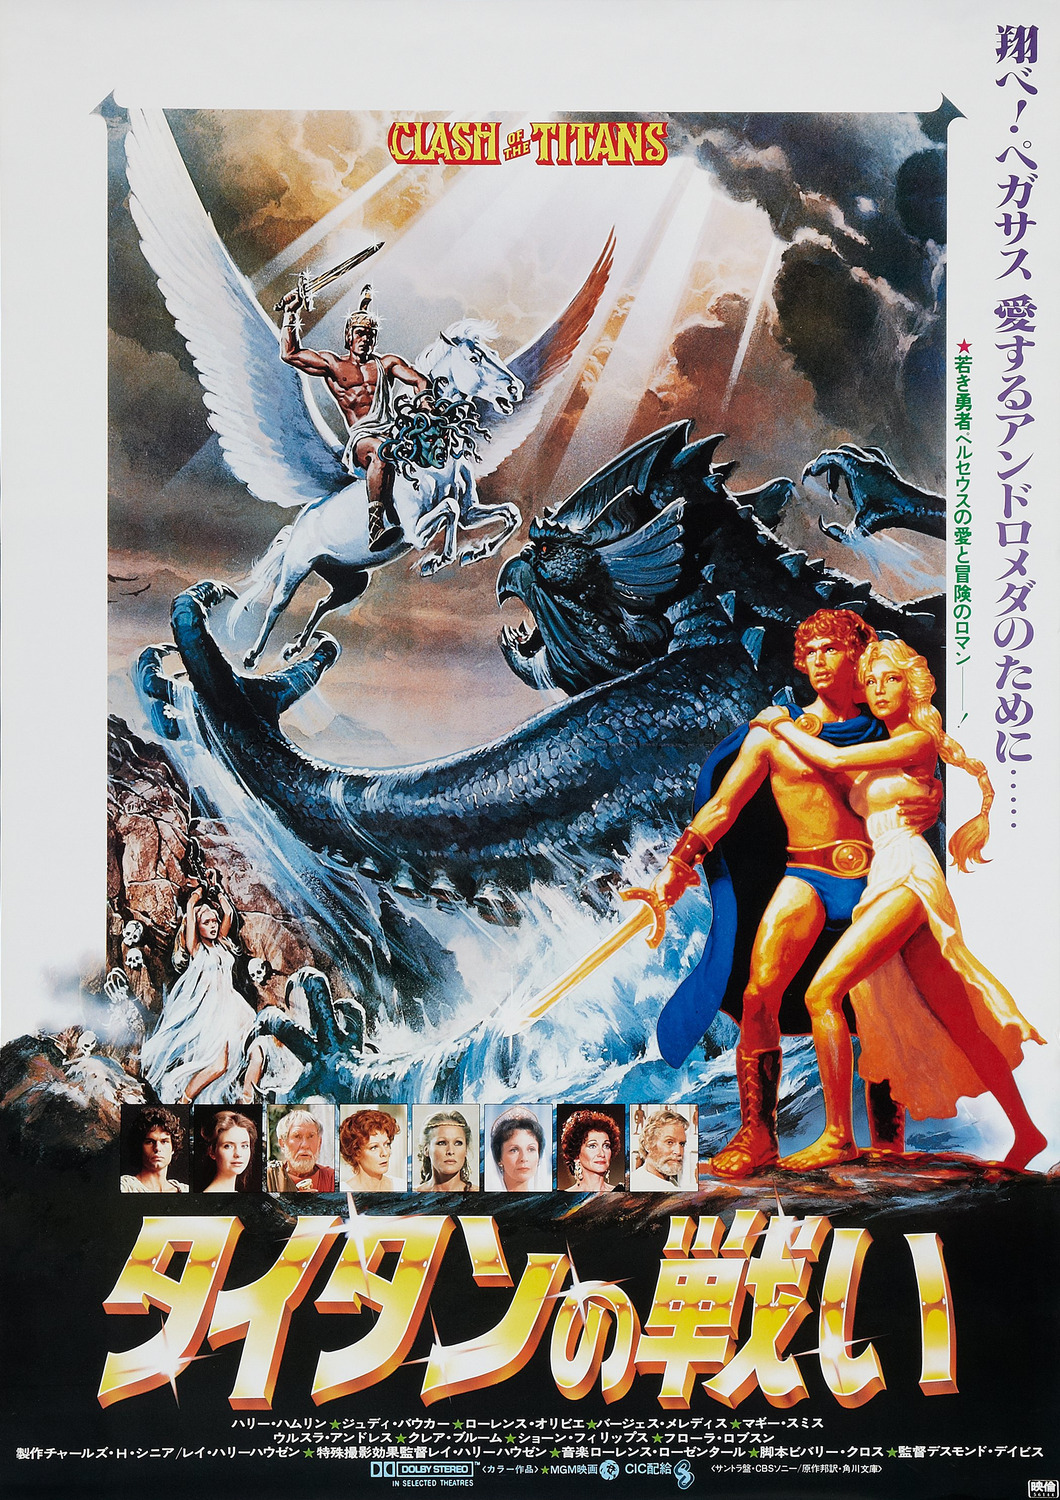 Extra Large Movie Poster Image for Clash of the Titans (#7 of 7)